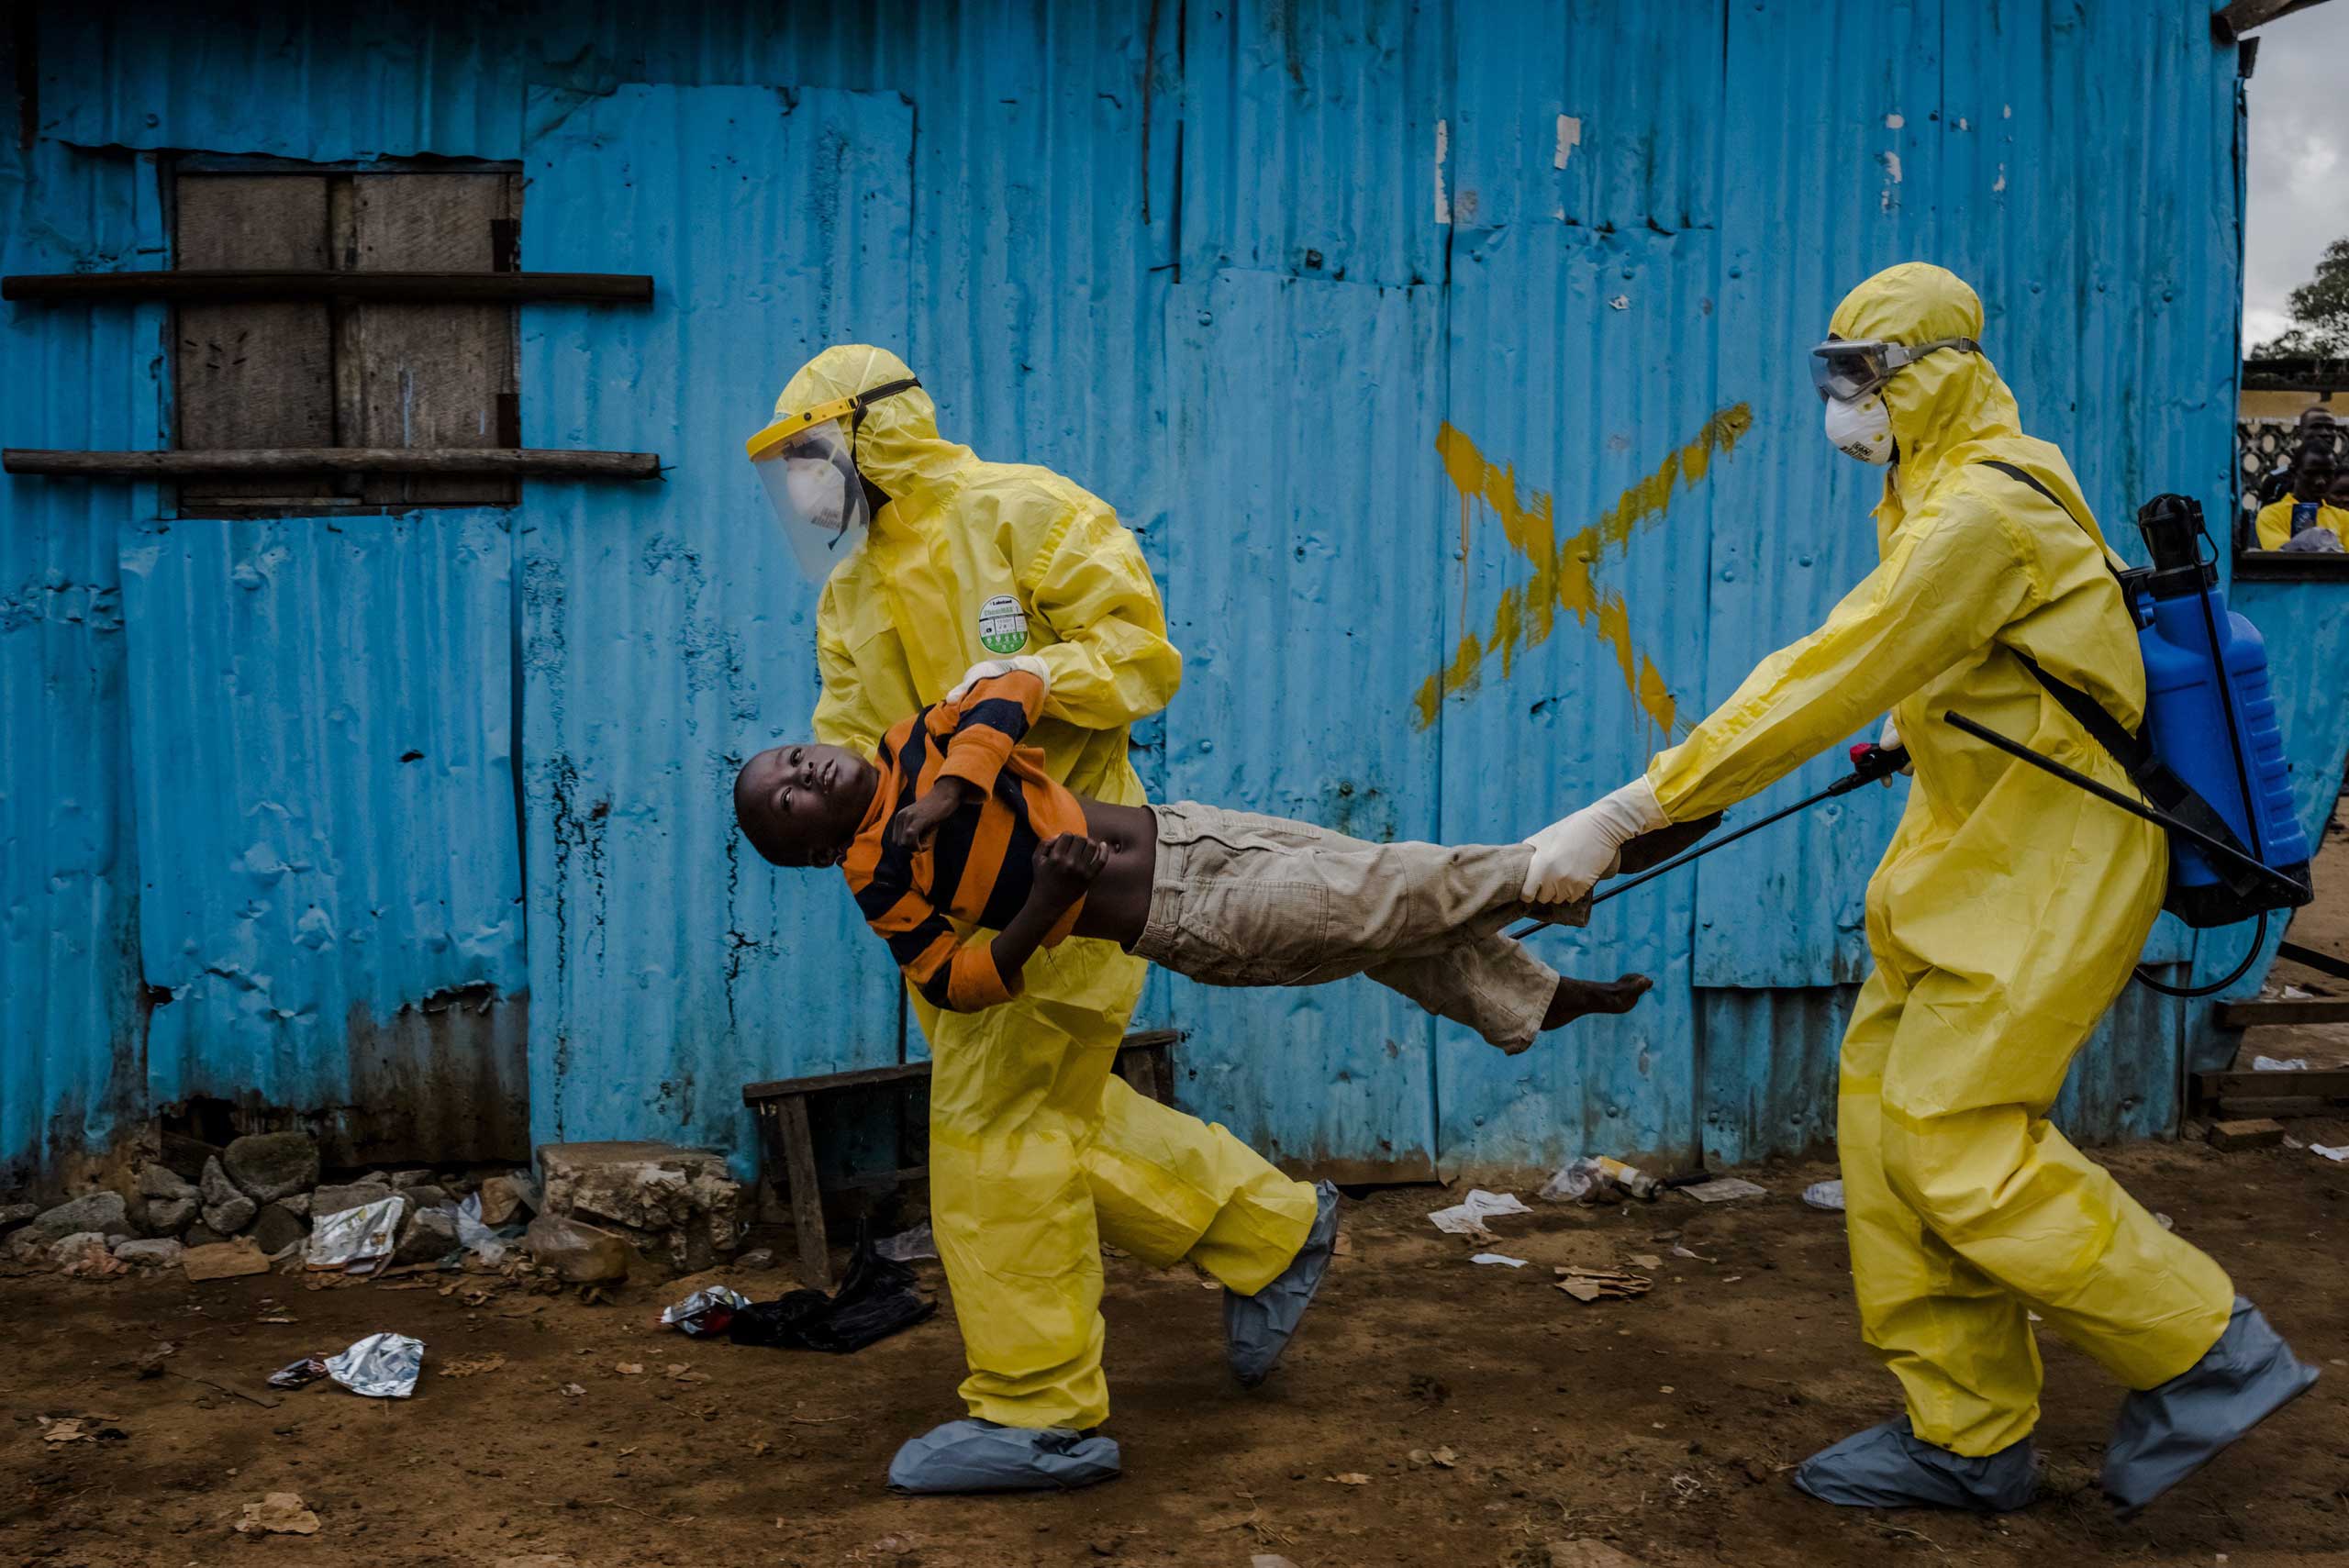 Medical staff rush into the treatment facility, carrying James Dorbor, 8, suspected of having Ebola. Since the health workers weren't wearing the appropriate protection against Ebola, they positioned James' body in a way to limit exposure to the deadly virus. Monrovia, Liberia, Sept. 5, 2014.